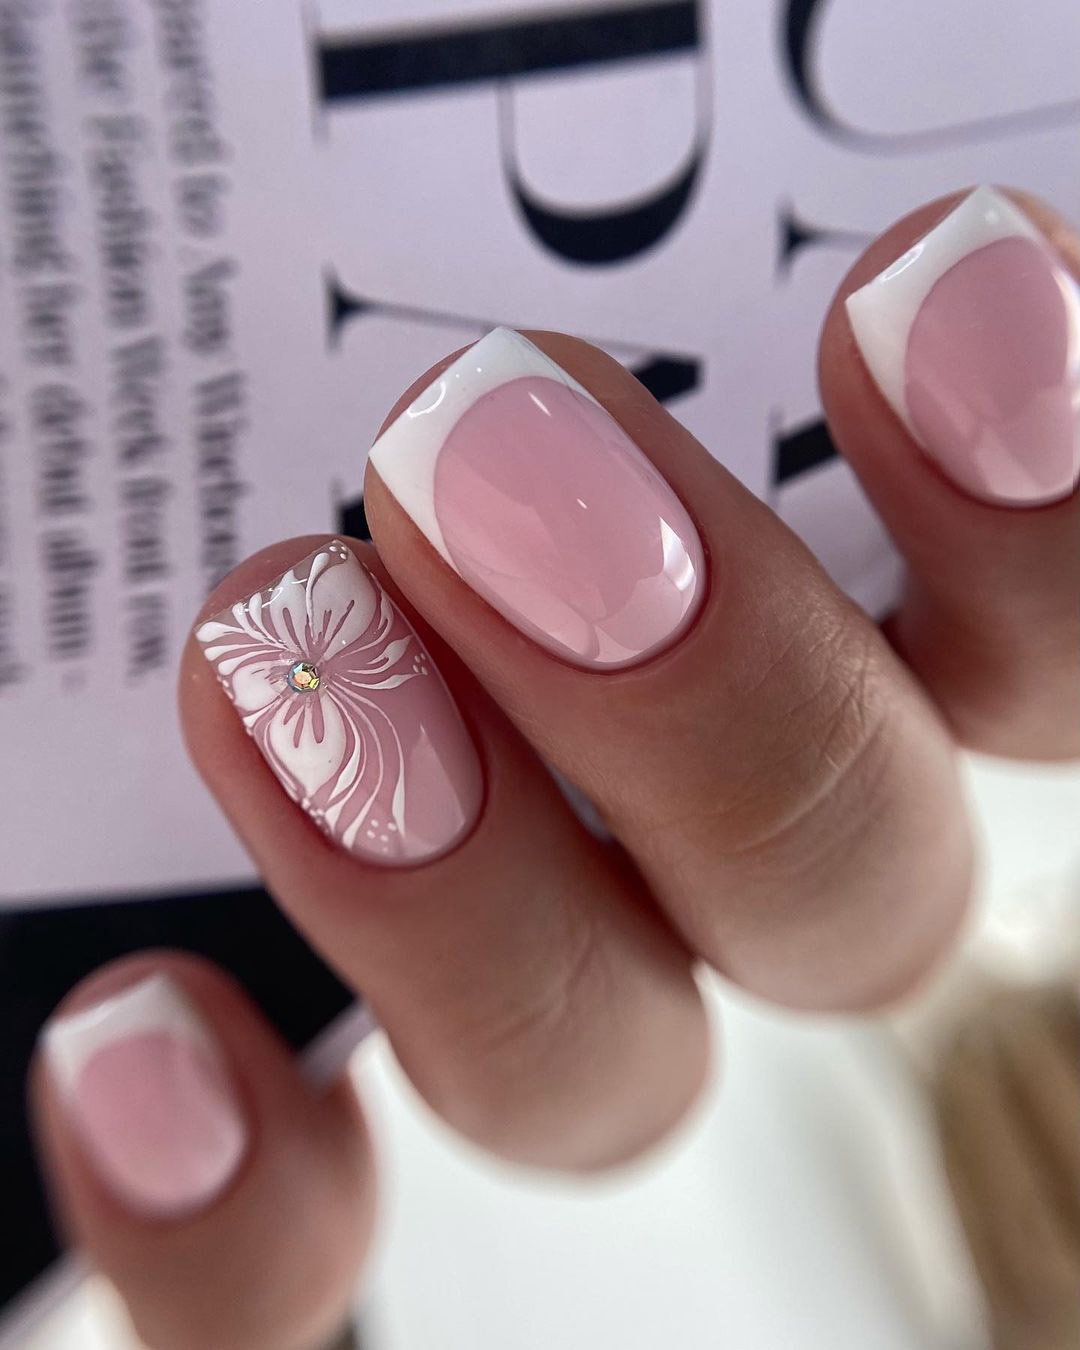 nail design wedding idea french with lace flower milana.gen11